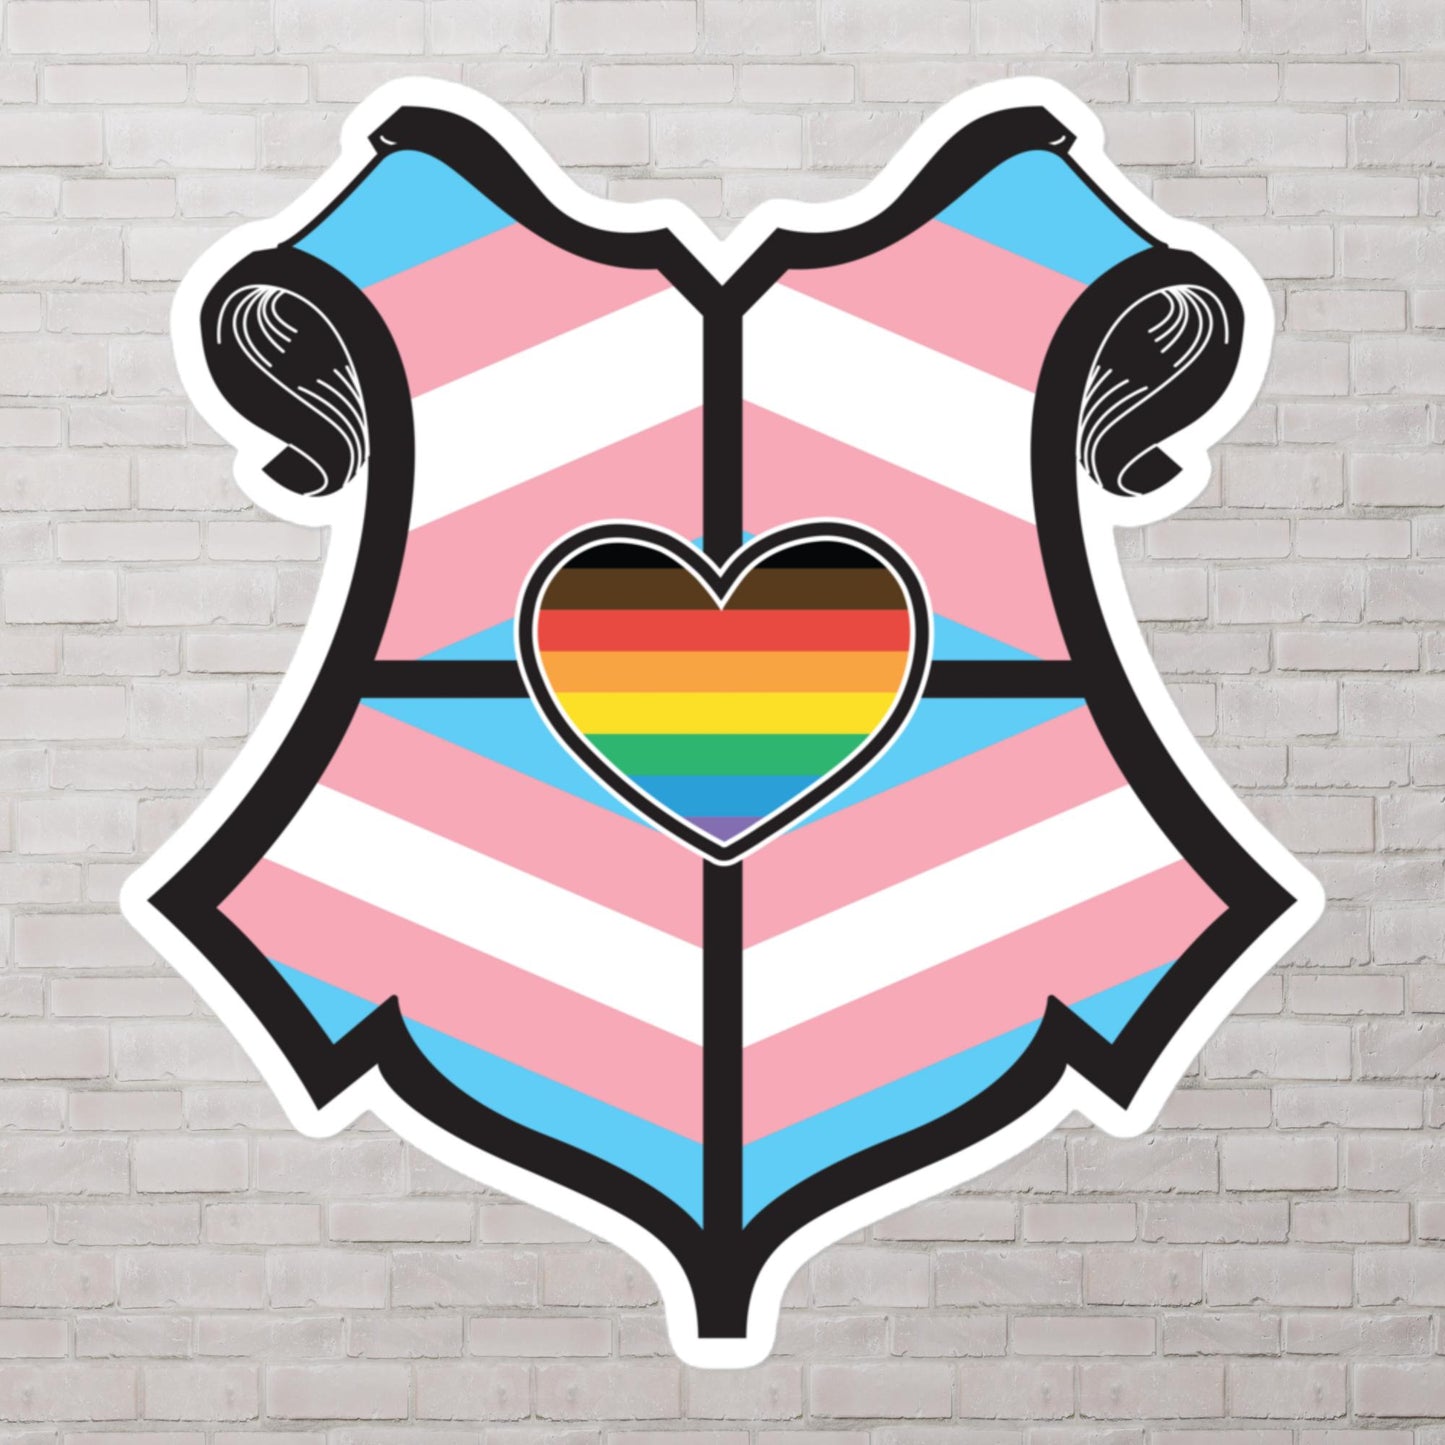 Wizards for Trans Rights House Shield stickers